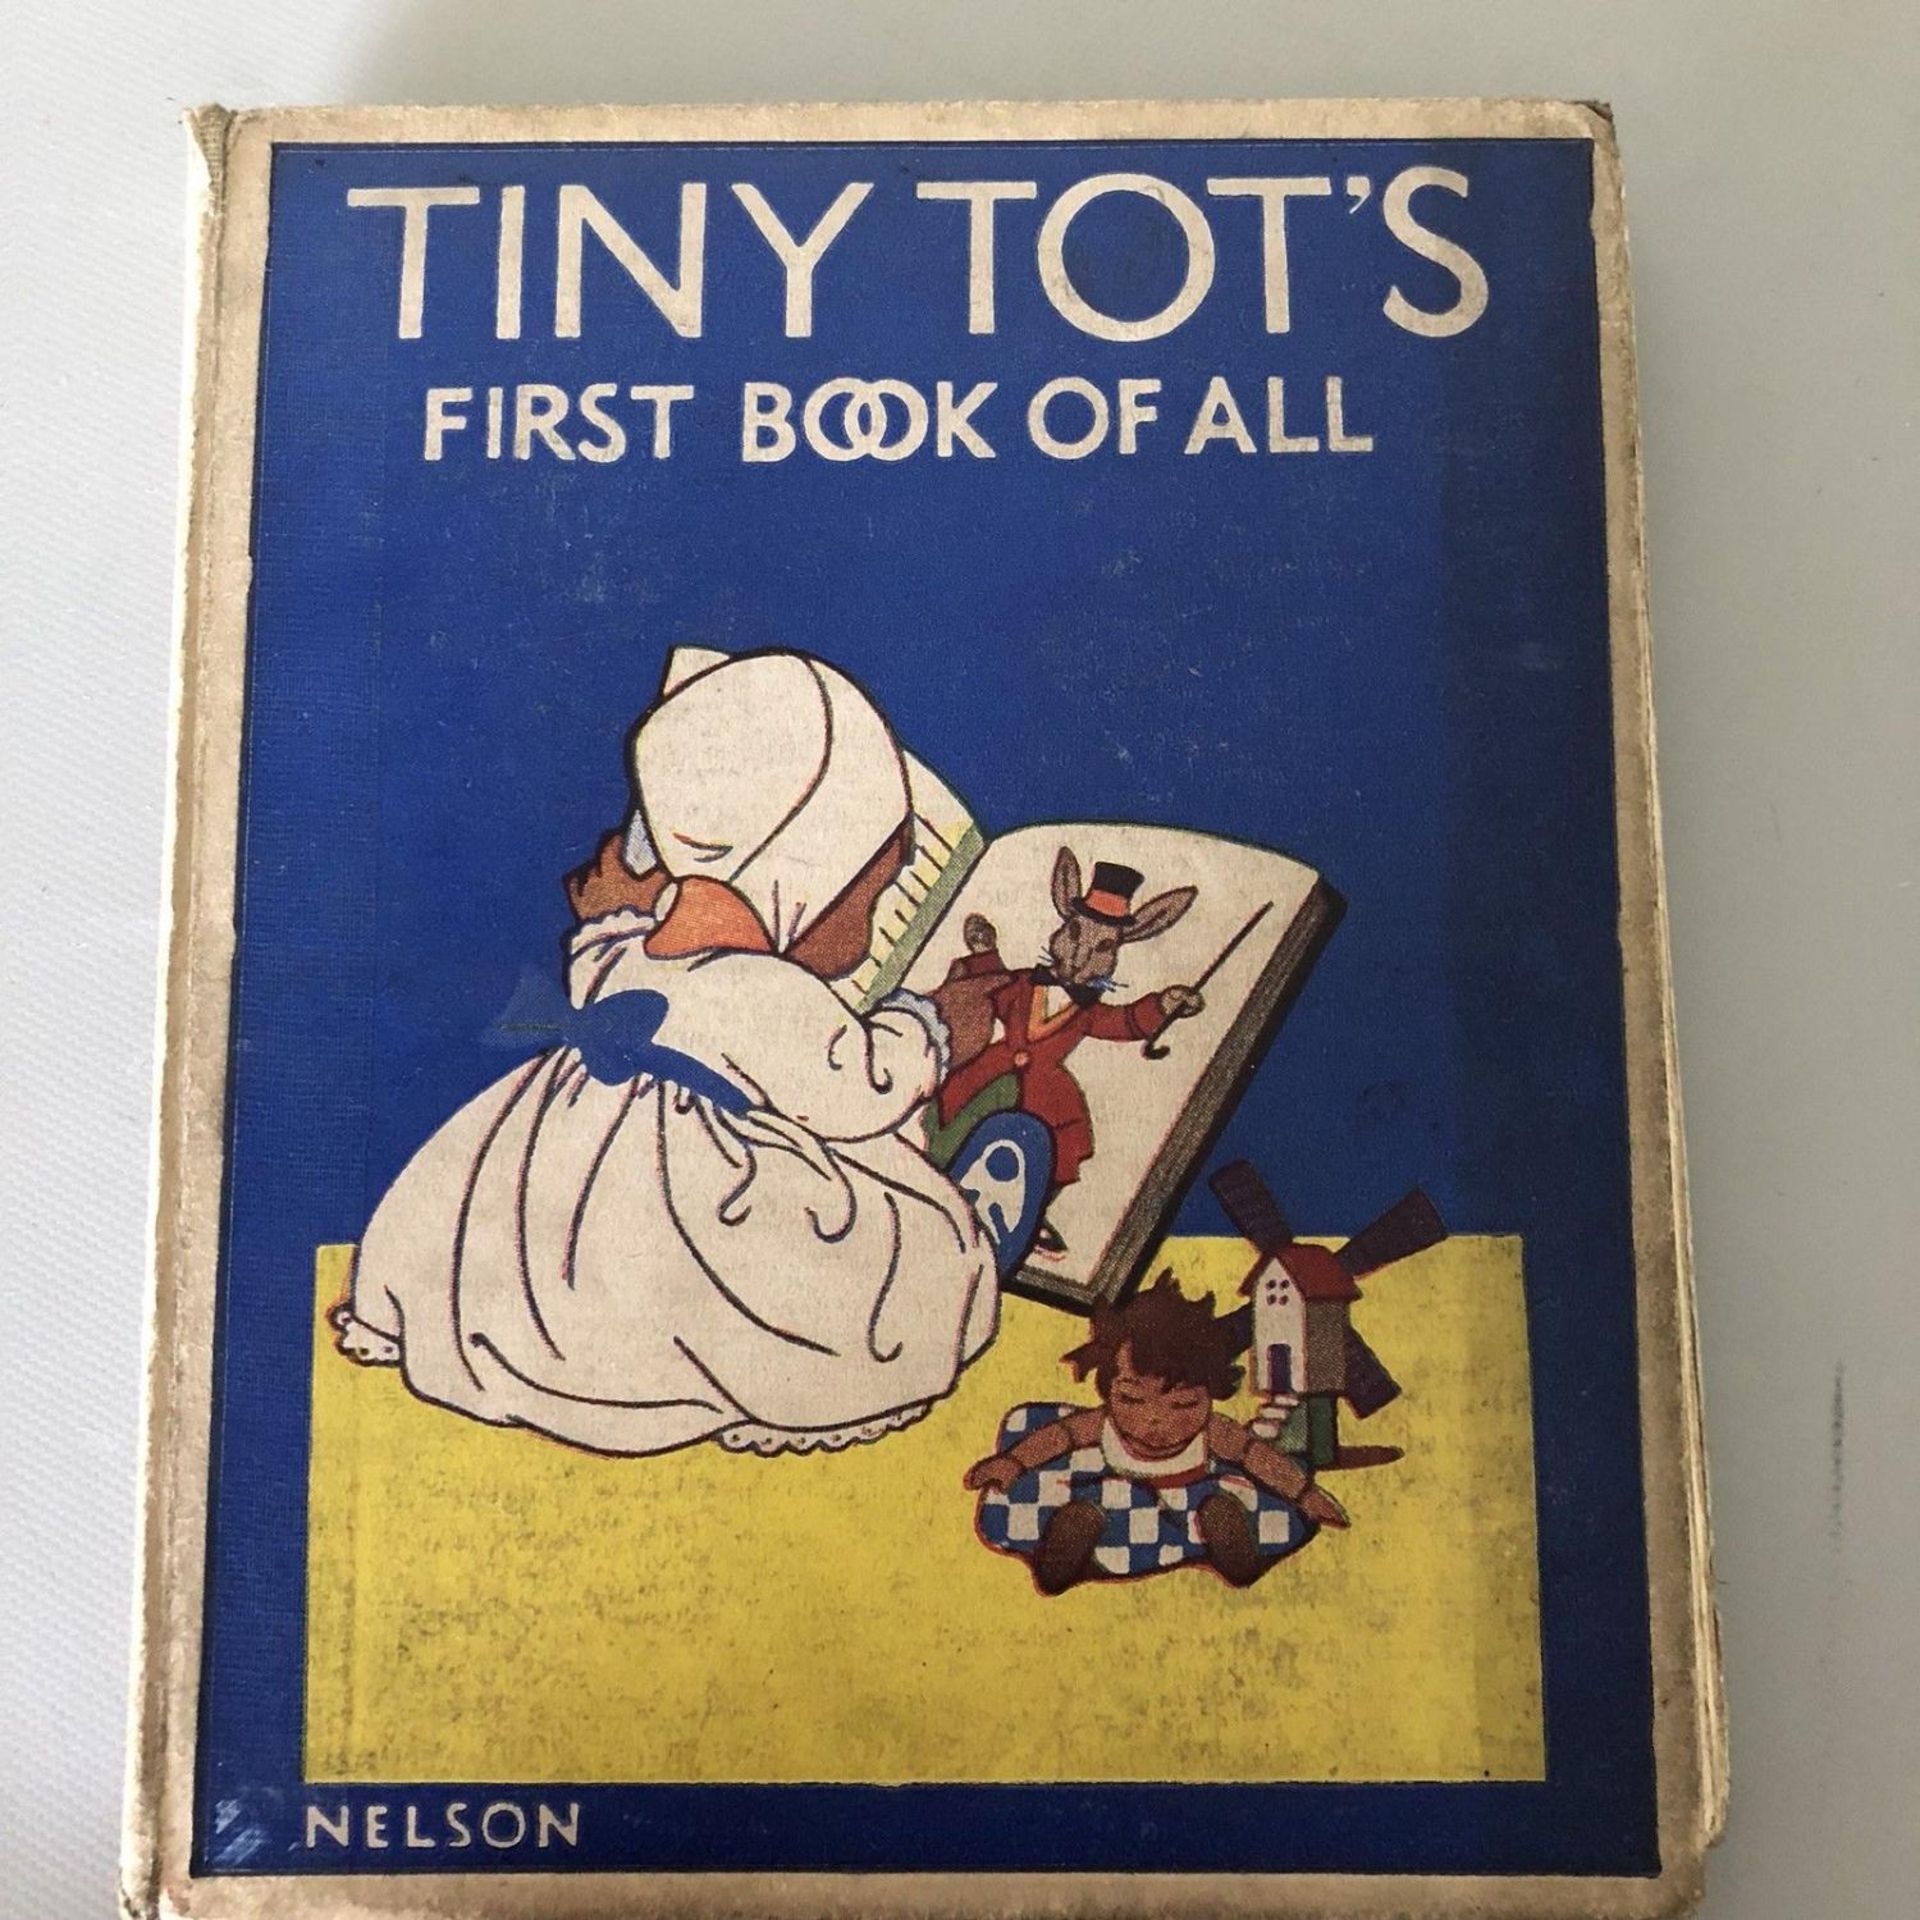 Vintage Children's Book "Tiny Tots First Book of All" c.1930 Alphabet Stories